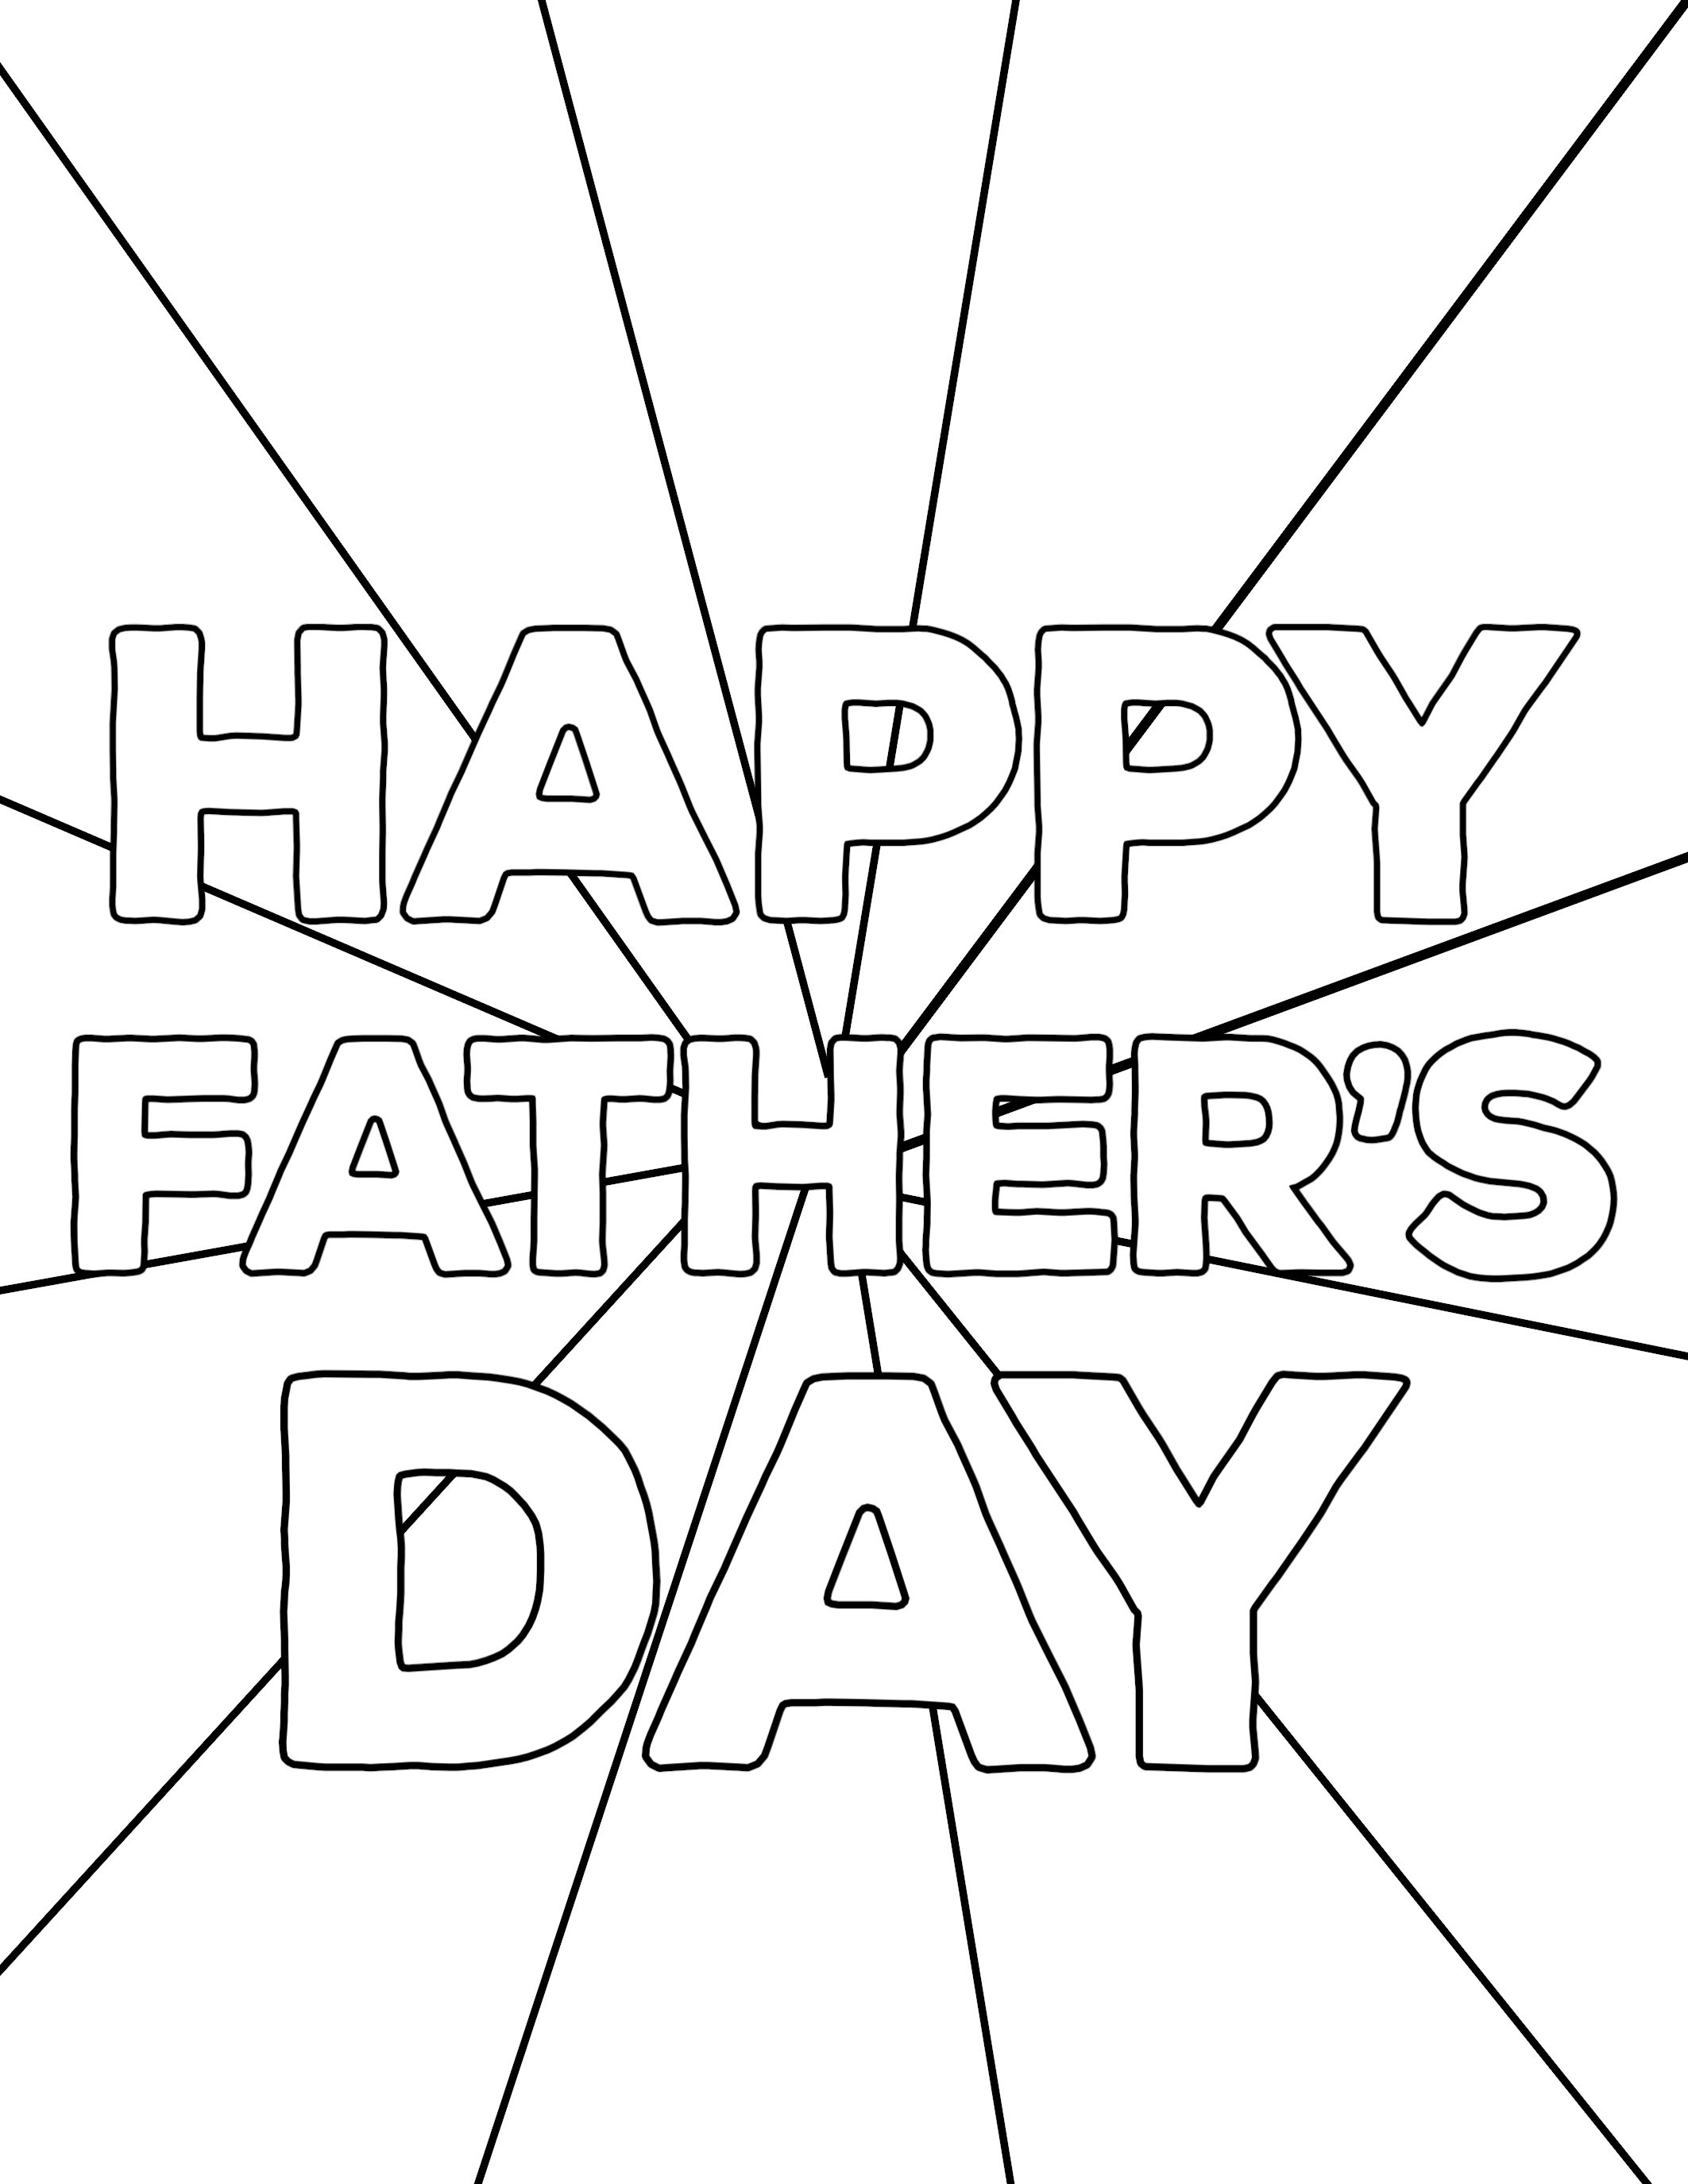 Fathers Day Coloring Page - Happy Father S Day Coloring Pages Free - Free Printable Fathers Day Coloring Pages For Grandpa